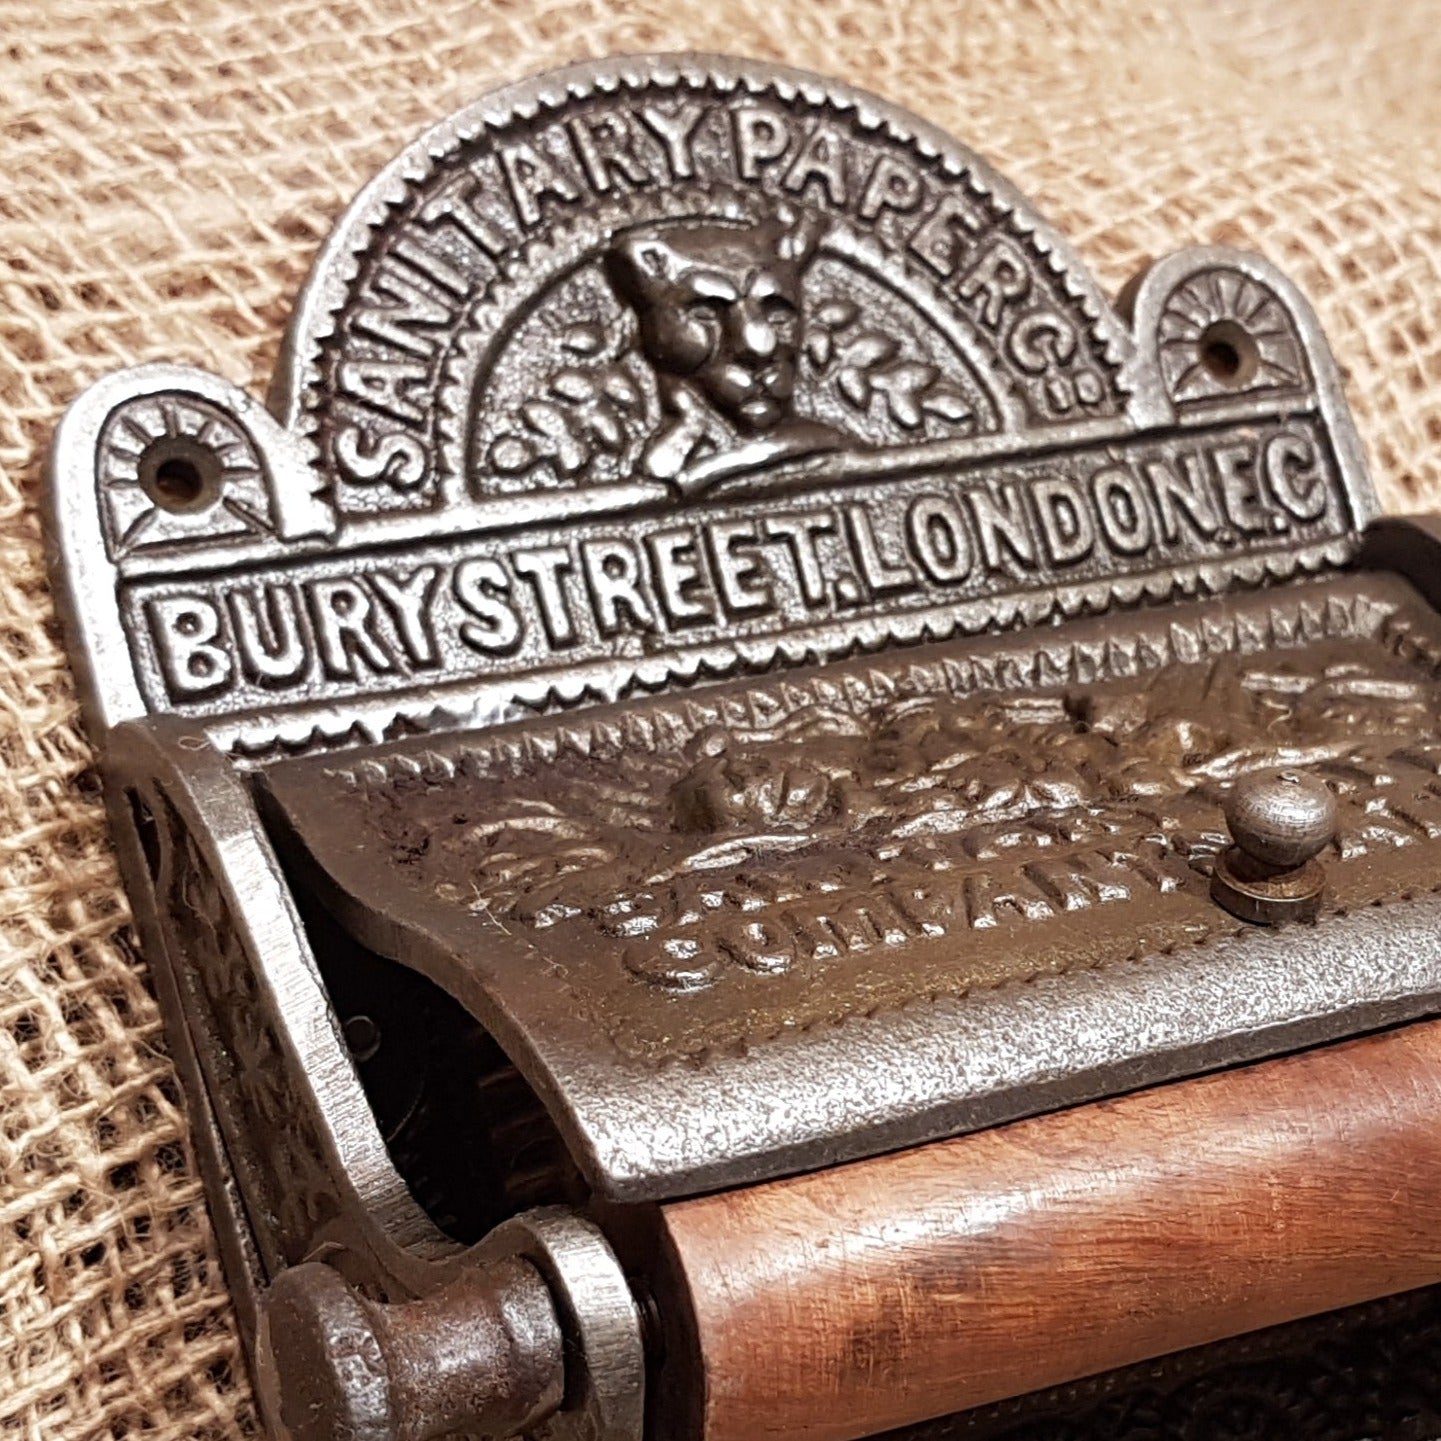 Bury St London Vintage Toilet Paper Holder Antique Iron - Spearhead Collection - Toilet Paper Holders - Bathroom Decor, Home Decor, Made in England, Toilet Paper Holders, Victorian